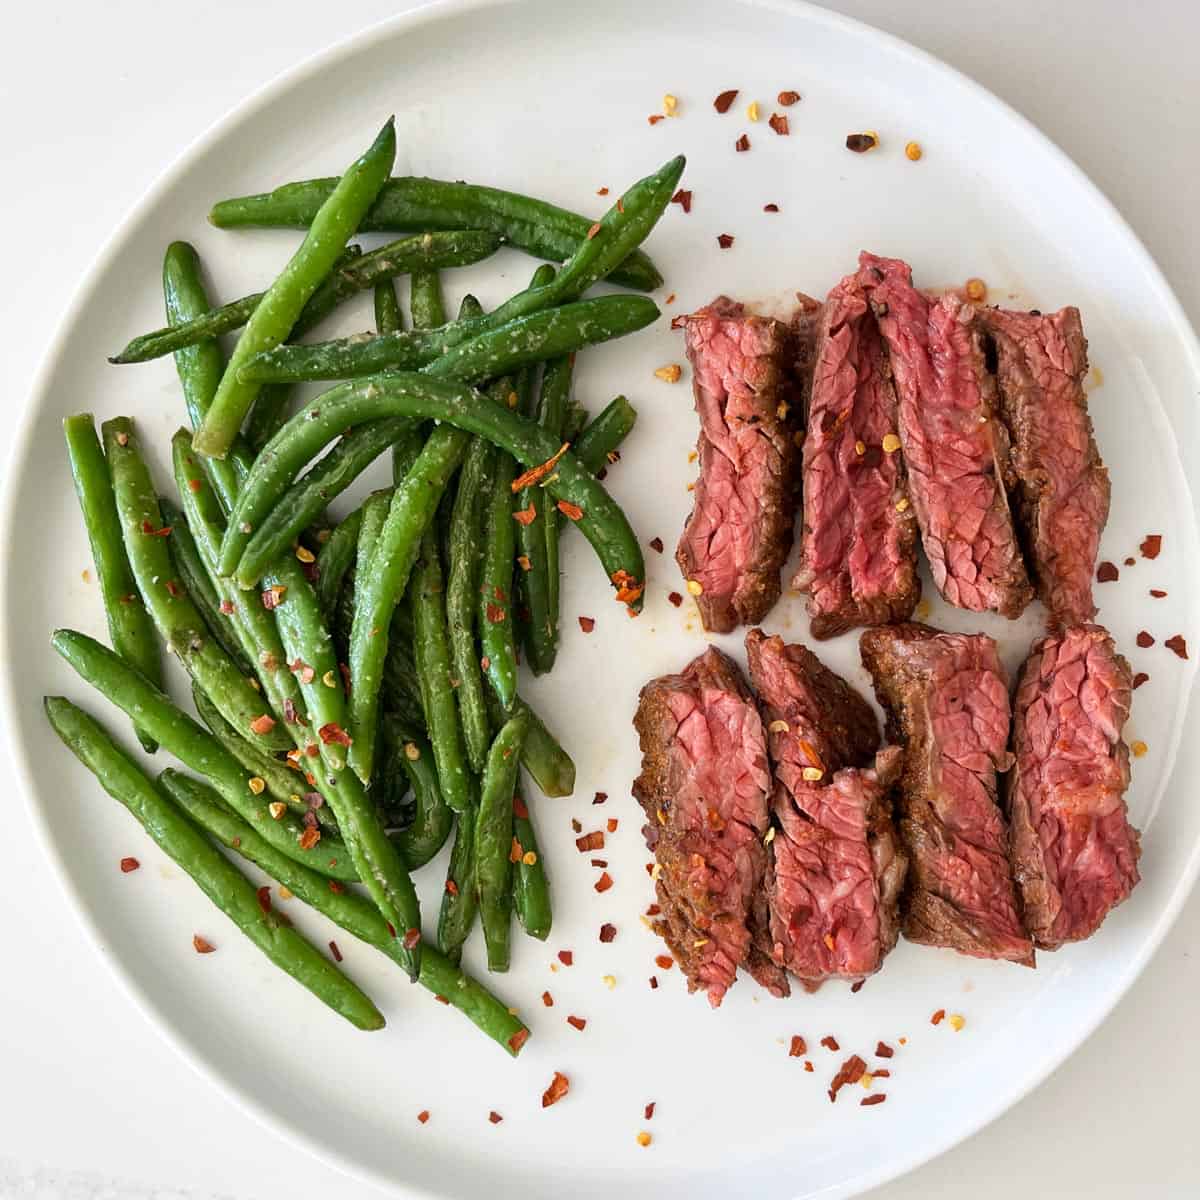 Skirt steak is served with a side of green beans.